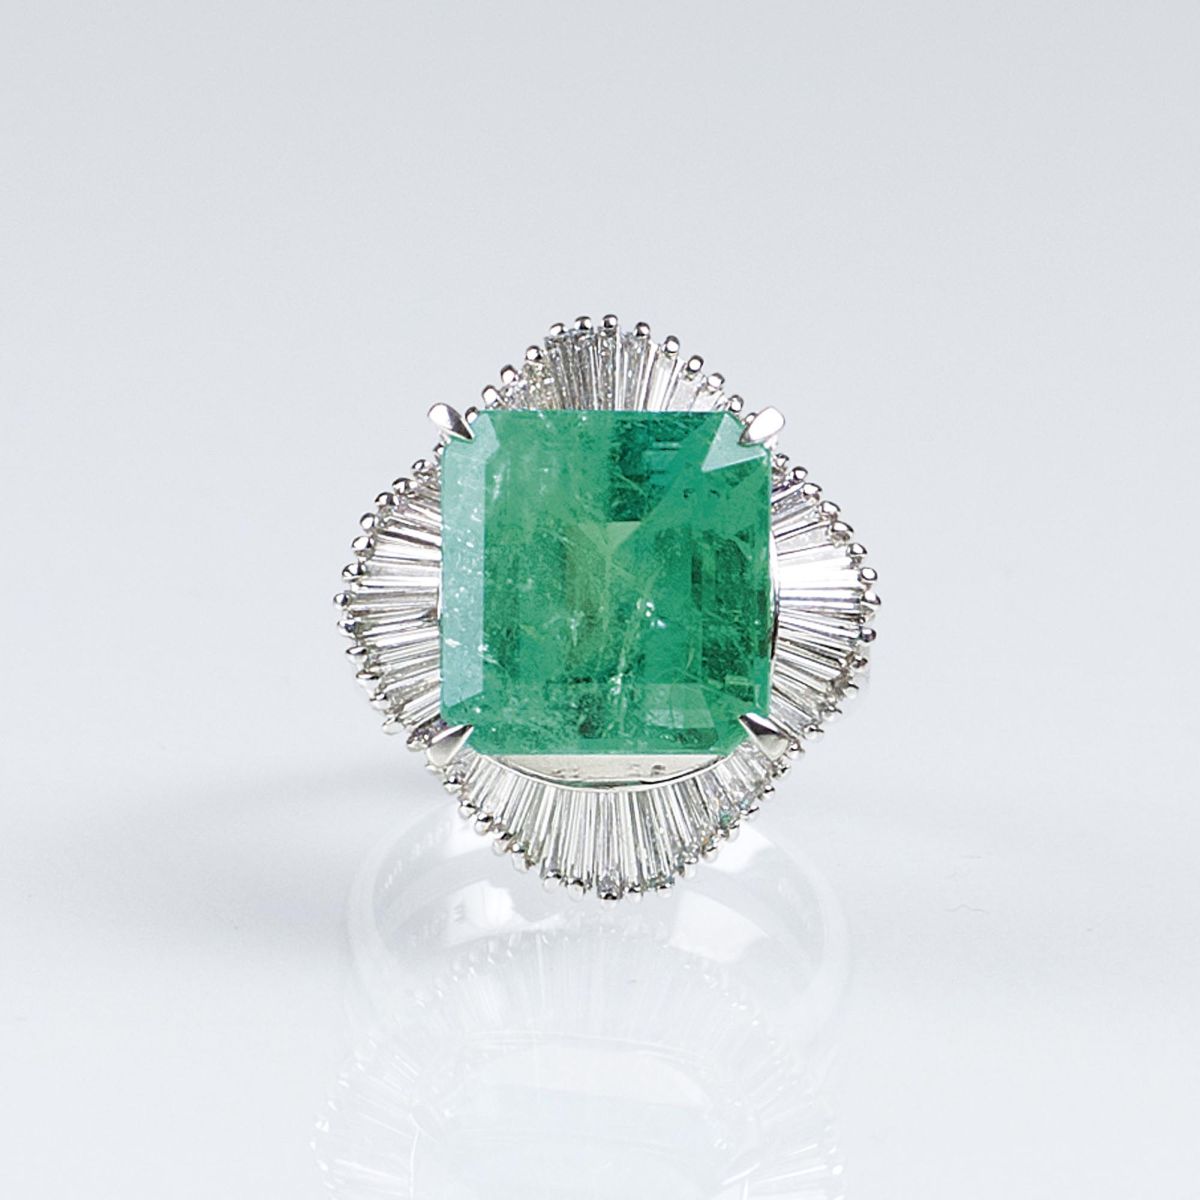 A very fine Colombian Emerald Ring with Diamonds